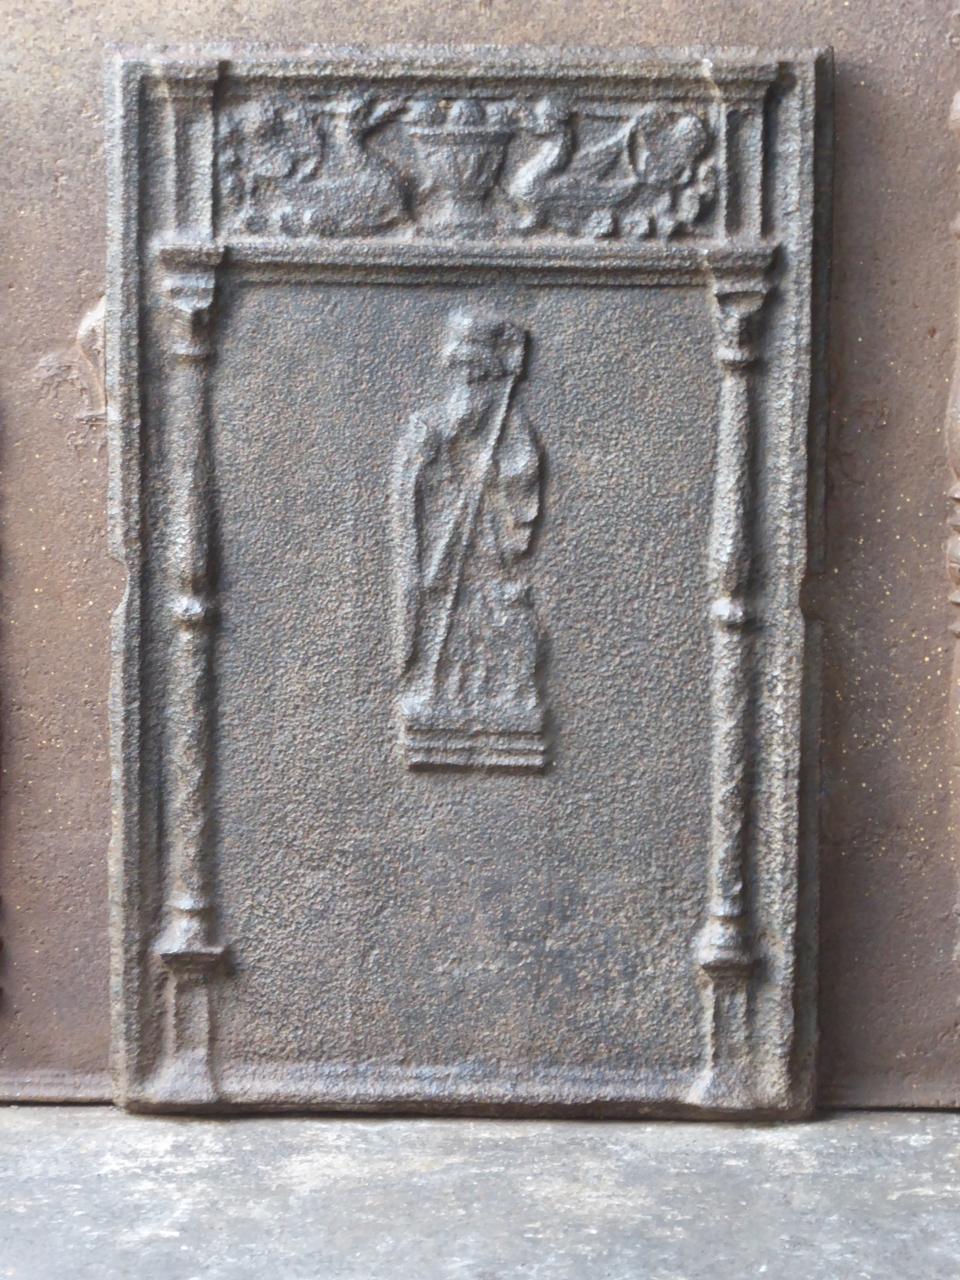 16th century German Gothic fireback with Apostle James, pillars and other decorations. This very old fireback is made in the early days of casting iron. Apostle James is the protector of the pilgrims. This fireback is described in 'Ofen- &